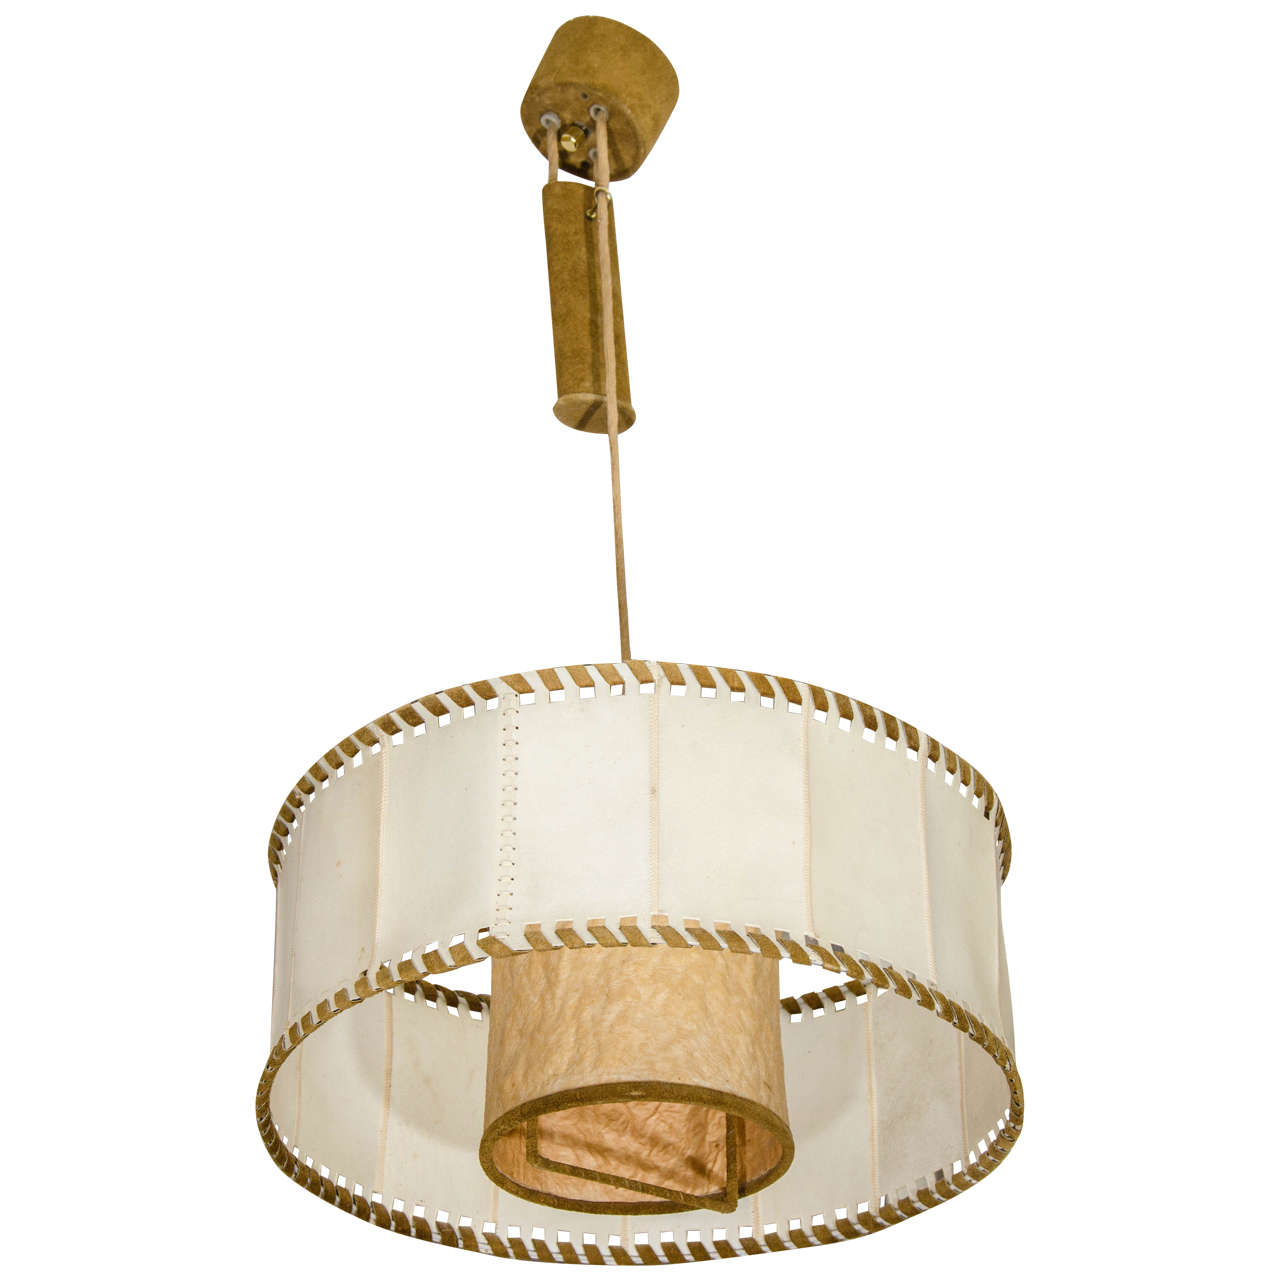 Midcentury Suede and Parchment Chandelier with Pulley